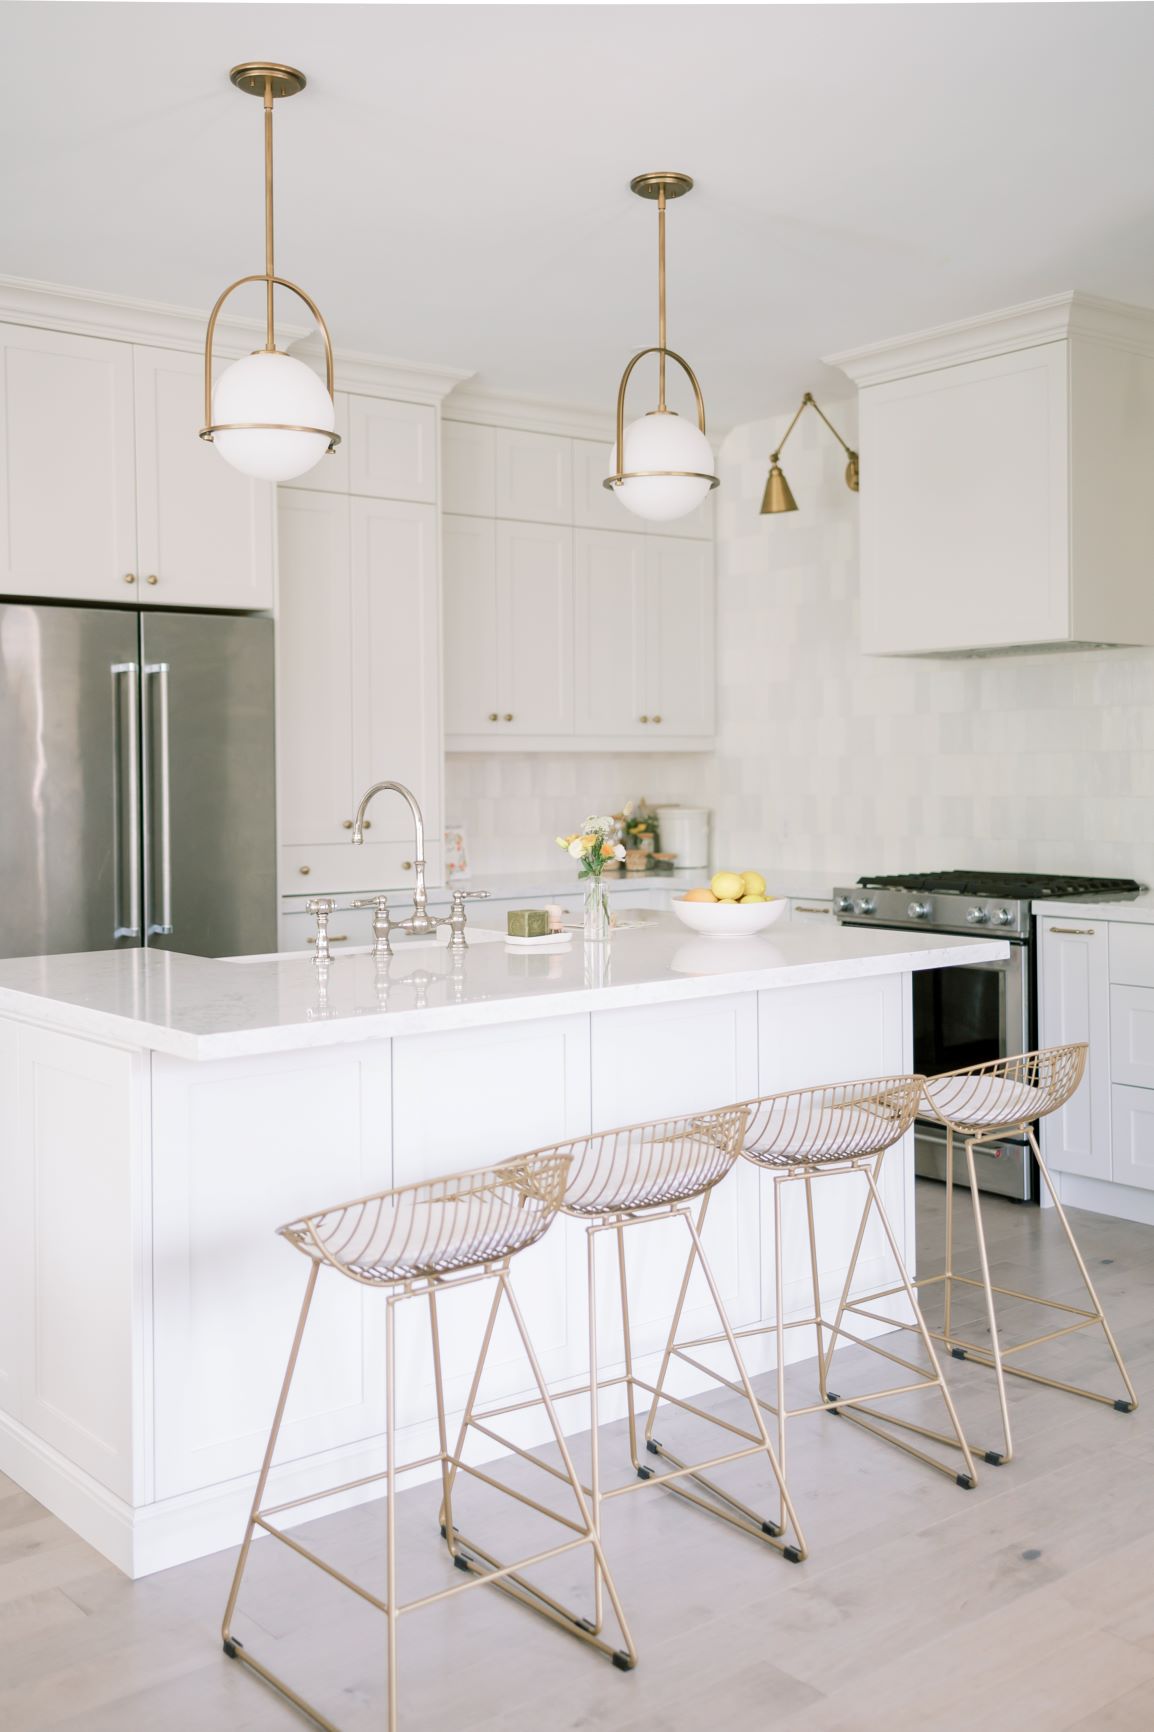 How to achieve a classic white kitchen